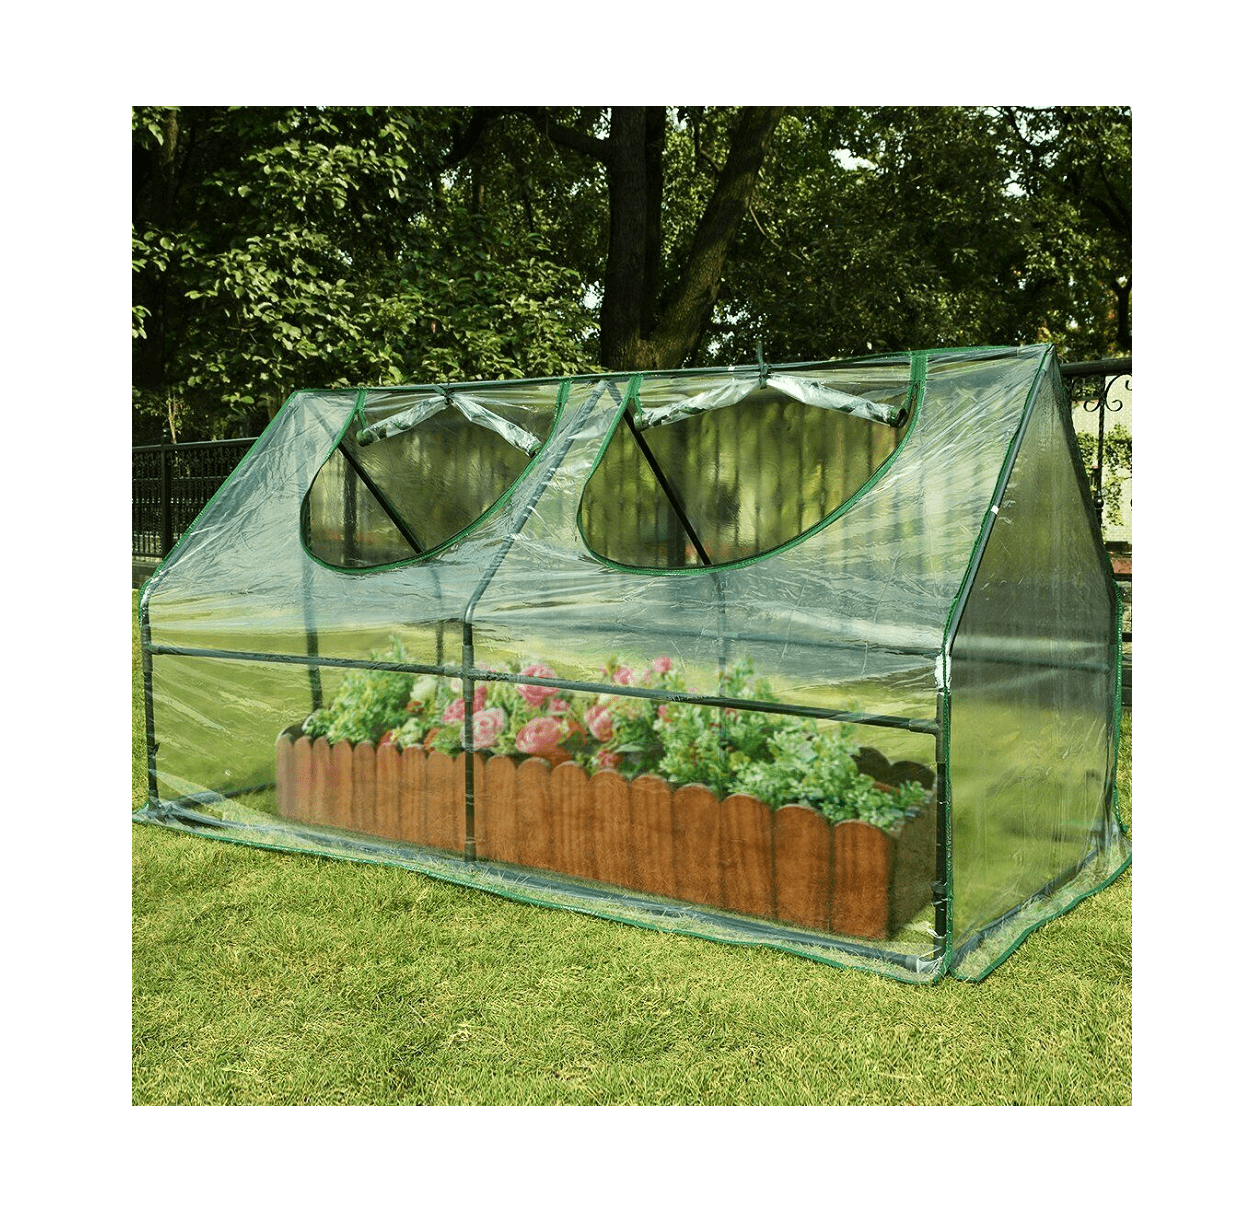 27×19×36 Inch Iron Frame Not Included Waterproof UV Protected Reinforced Mini Greenhouse Small Green Hot House Indoor Outdoor Plant Gardening Green House Canopy 